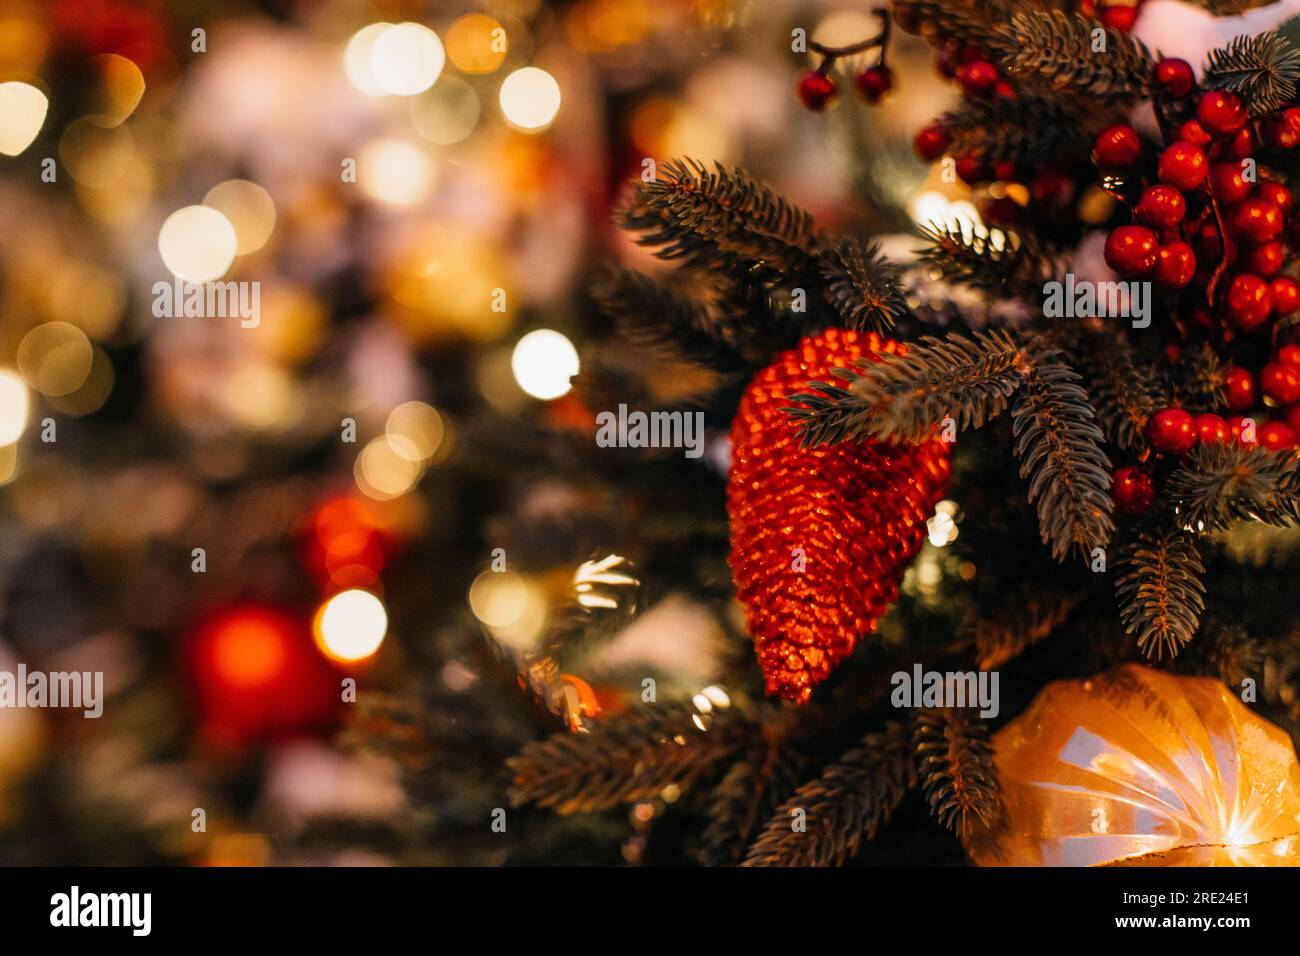 Red berries and pine cone hanging on the Christmas tree. Creative details and golden magic bokeh lights on background. Winter holiday decorations Stock Photo